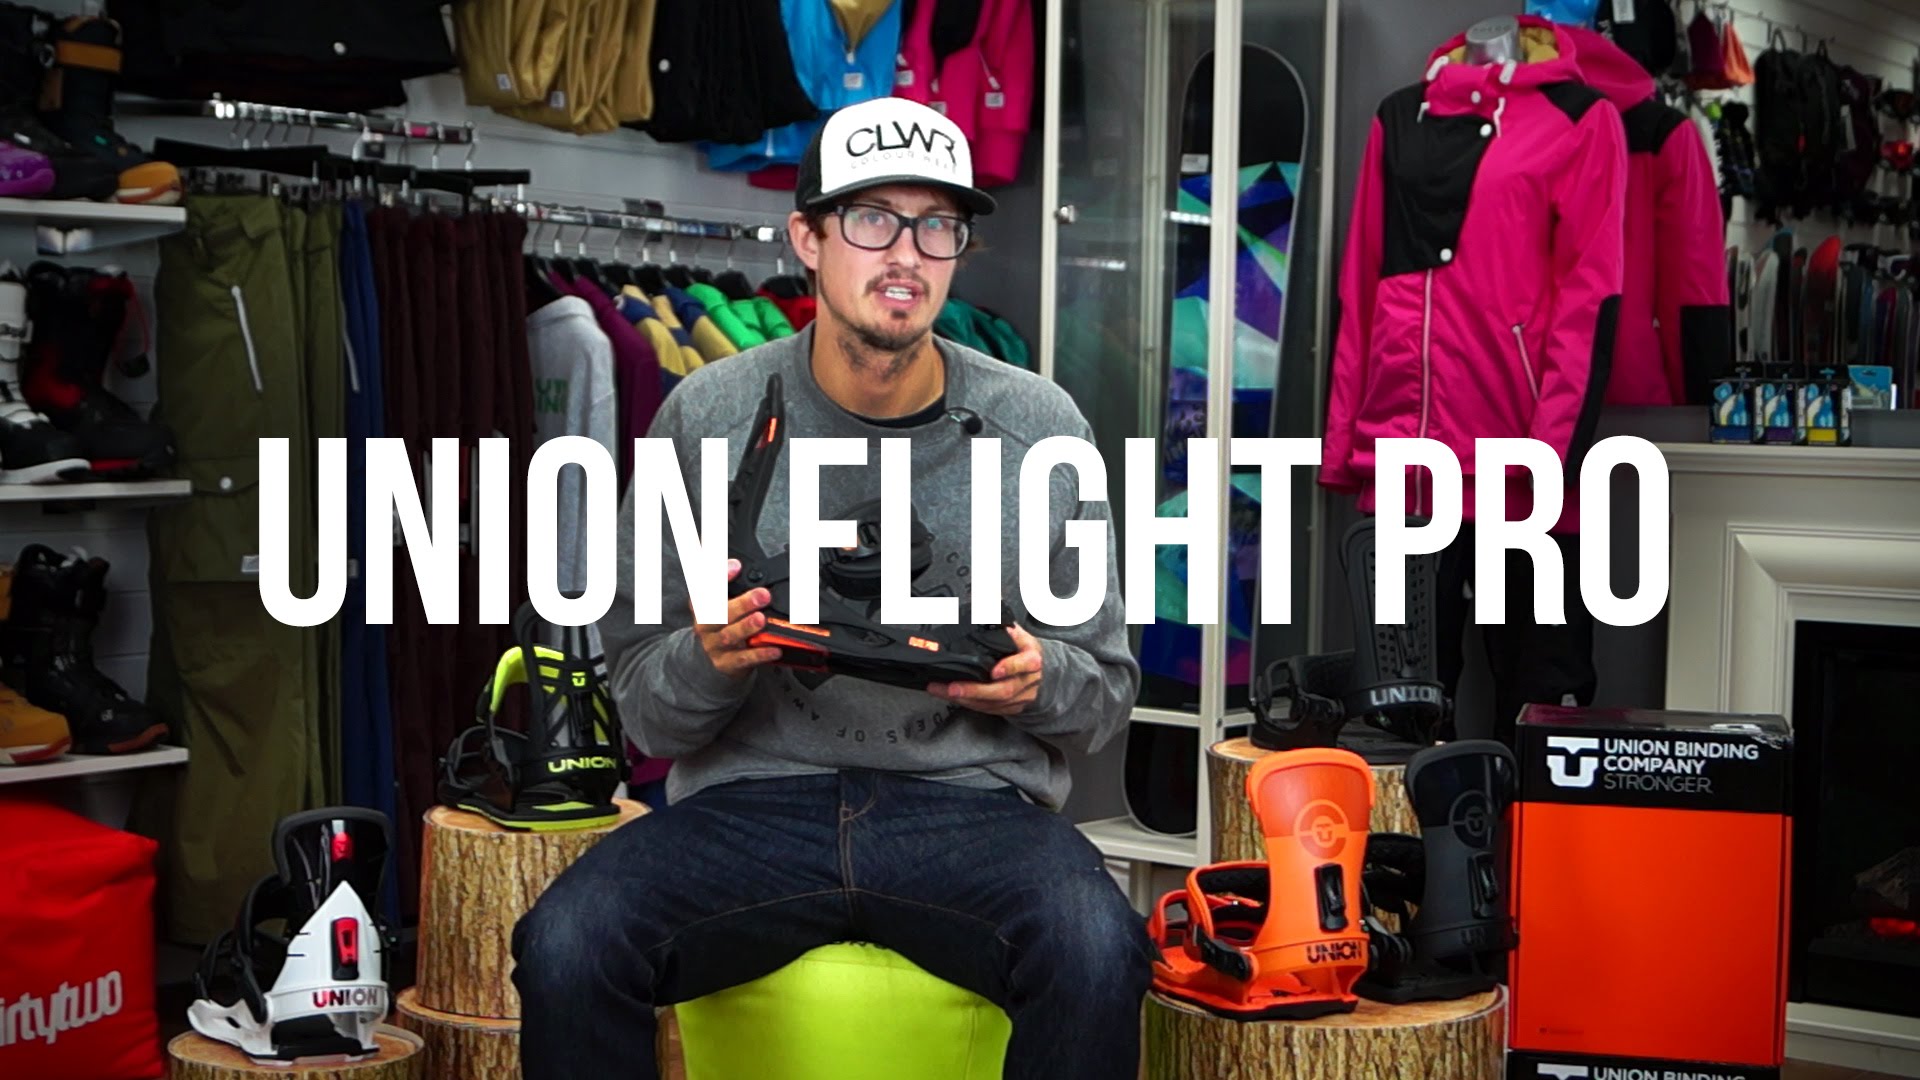 Union Flight Pro 2015 Snowboard Binding Review By Adam At Bliss Snowboards